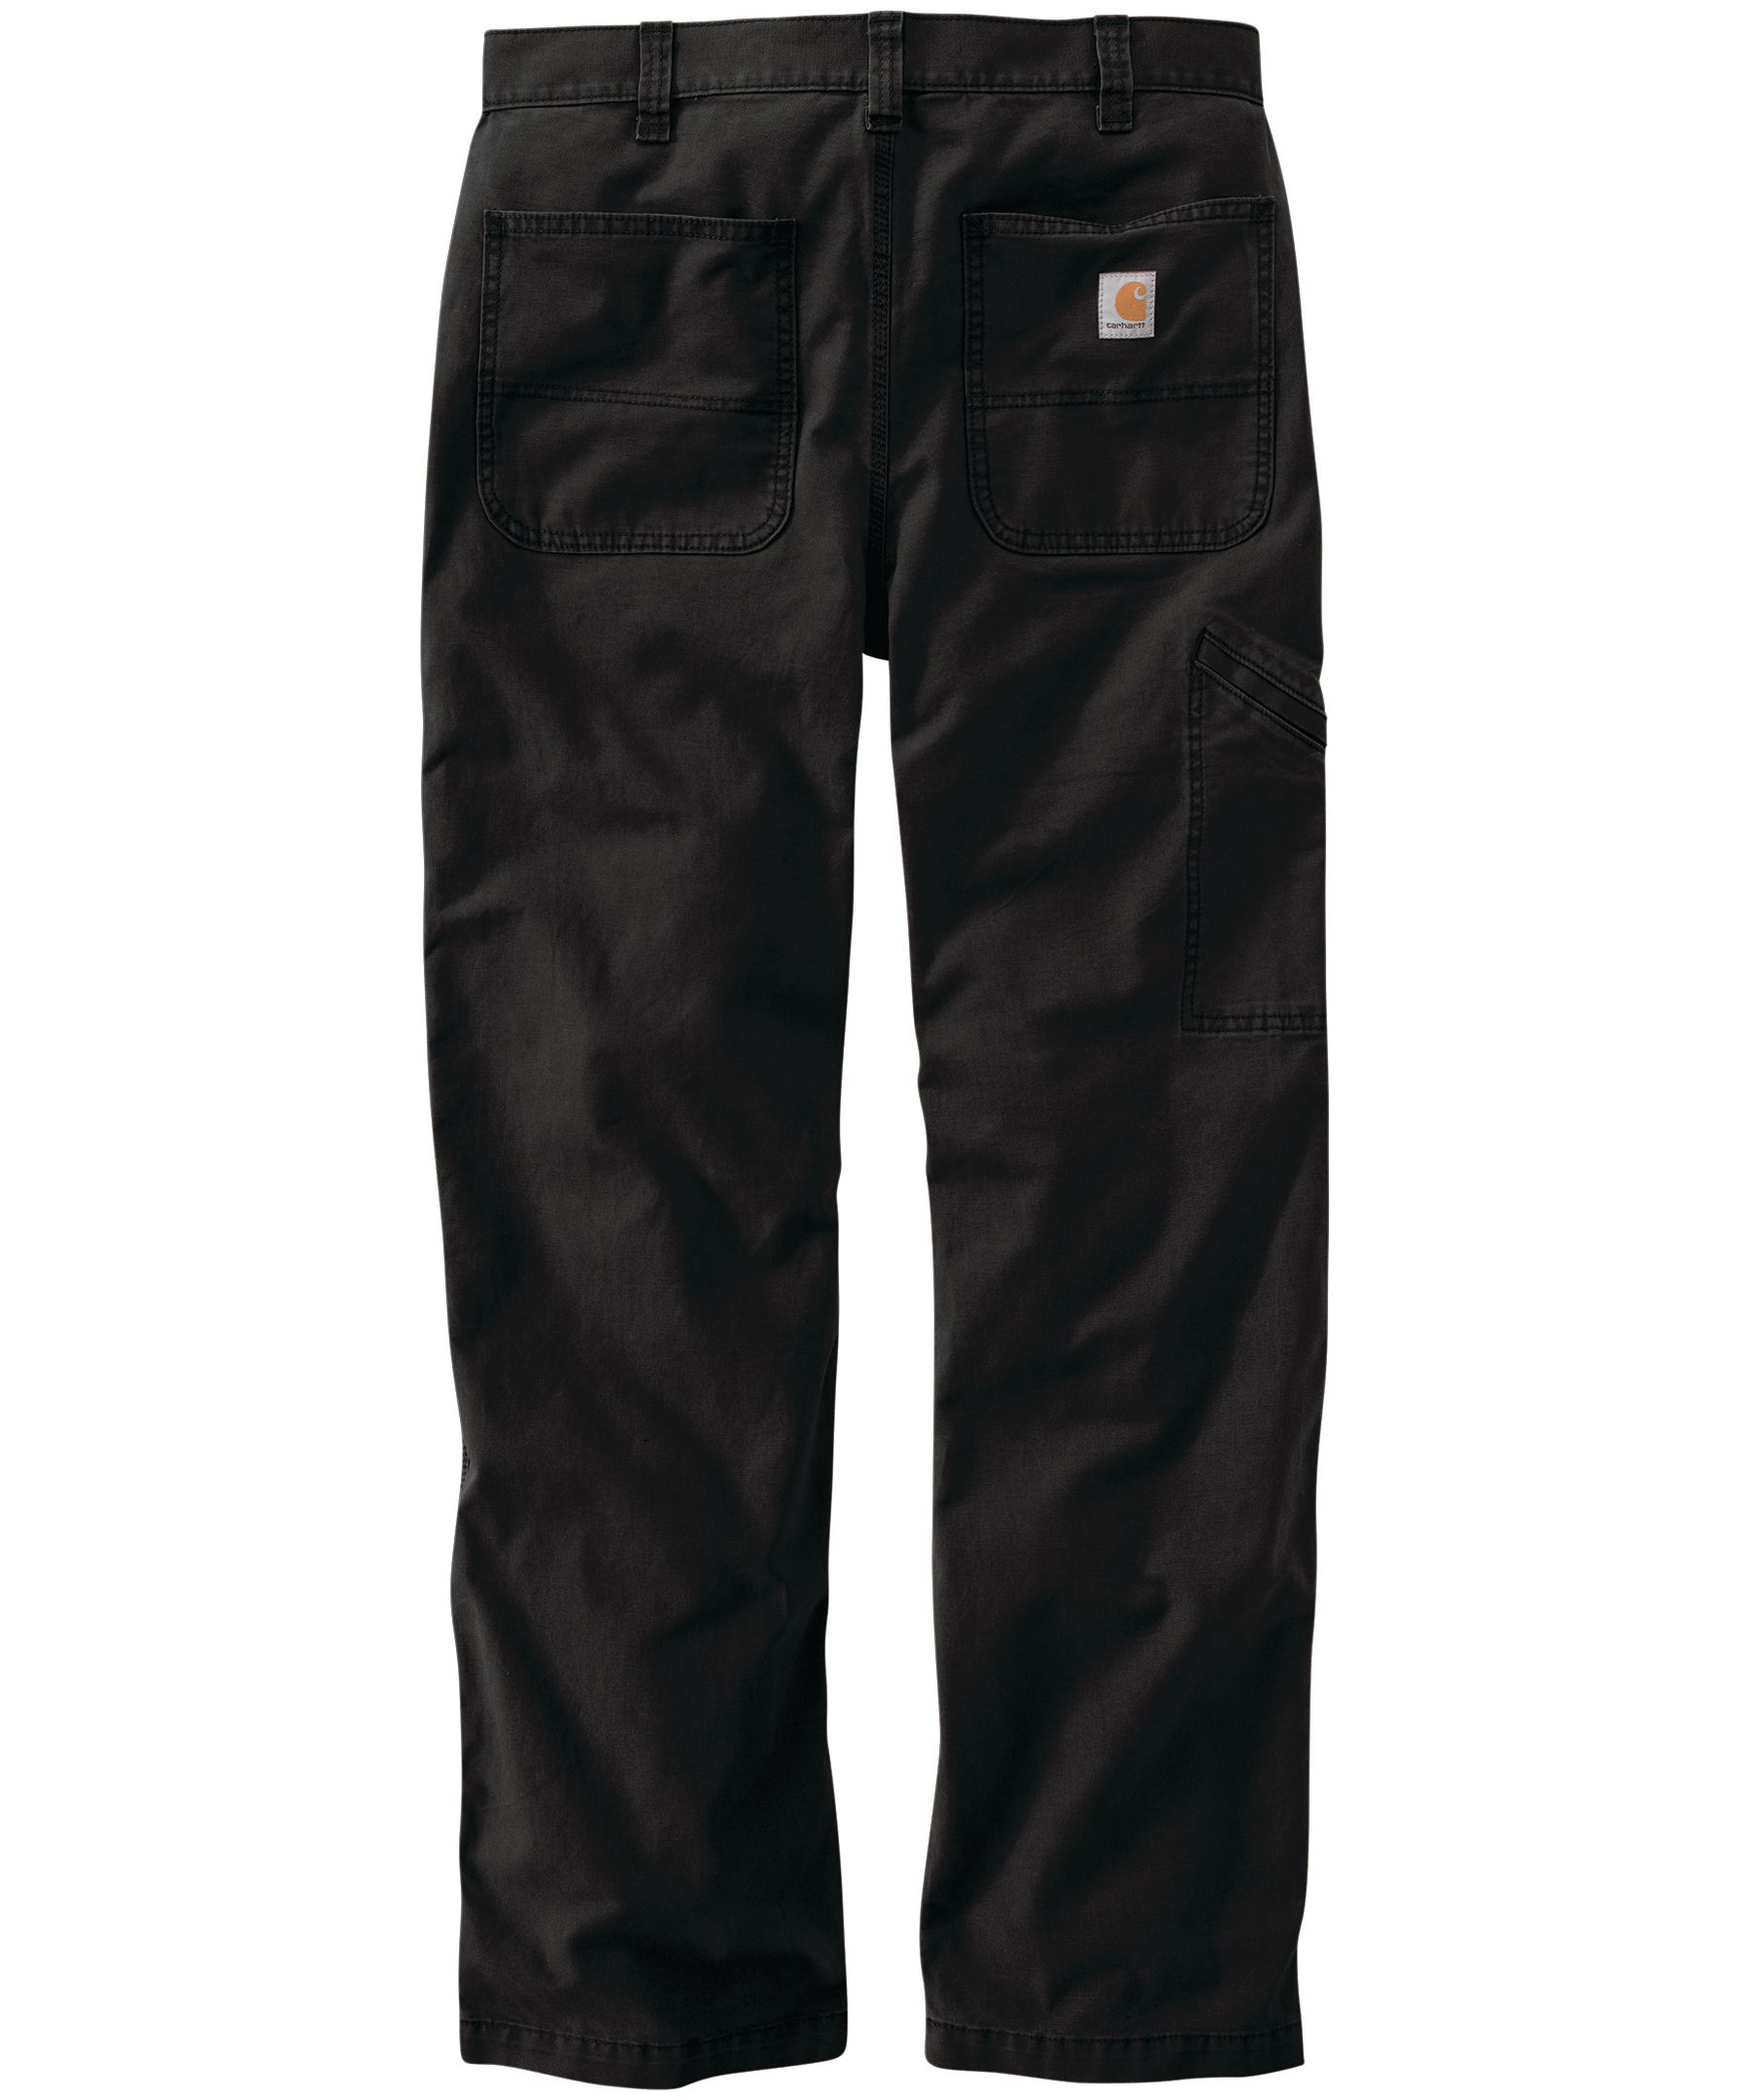 Carhartt Men's Rugged Flex Rigby Relaxed Fit Dungaree Work Pants - | Marks